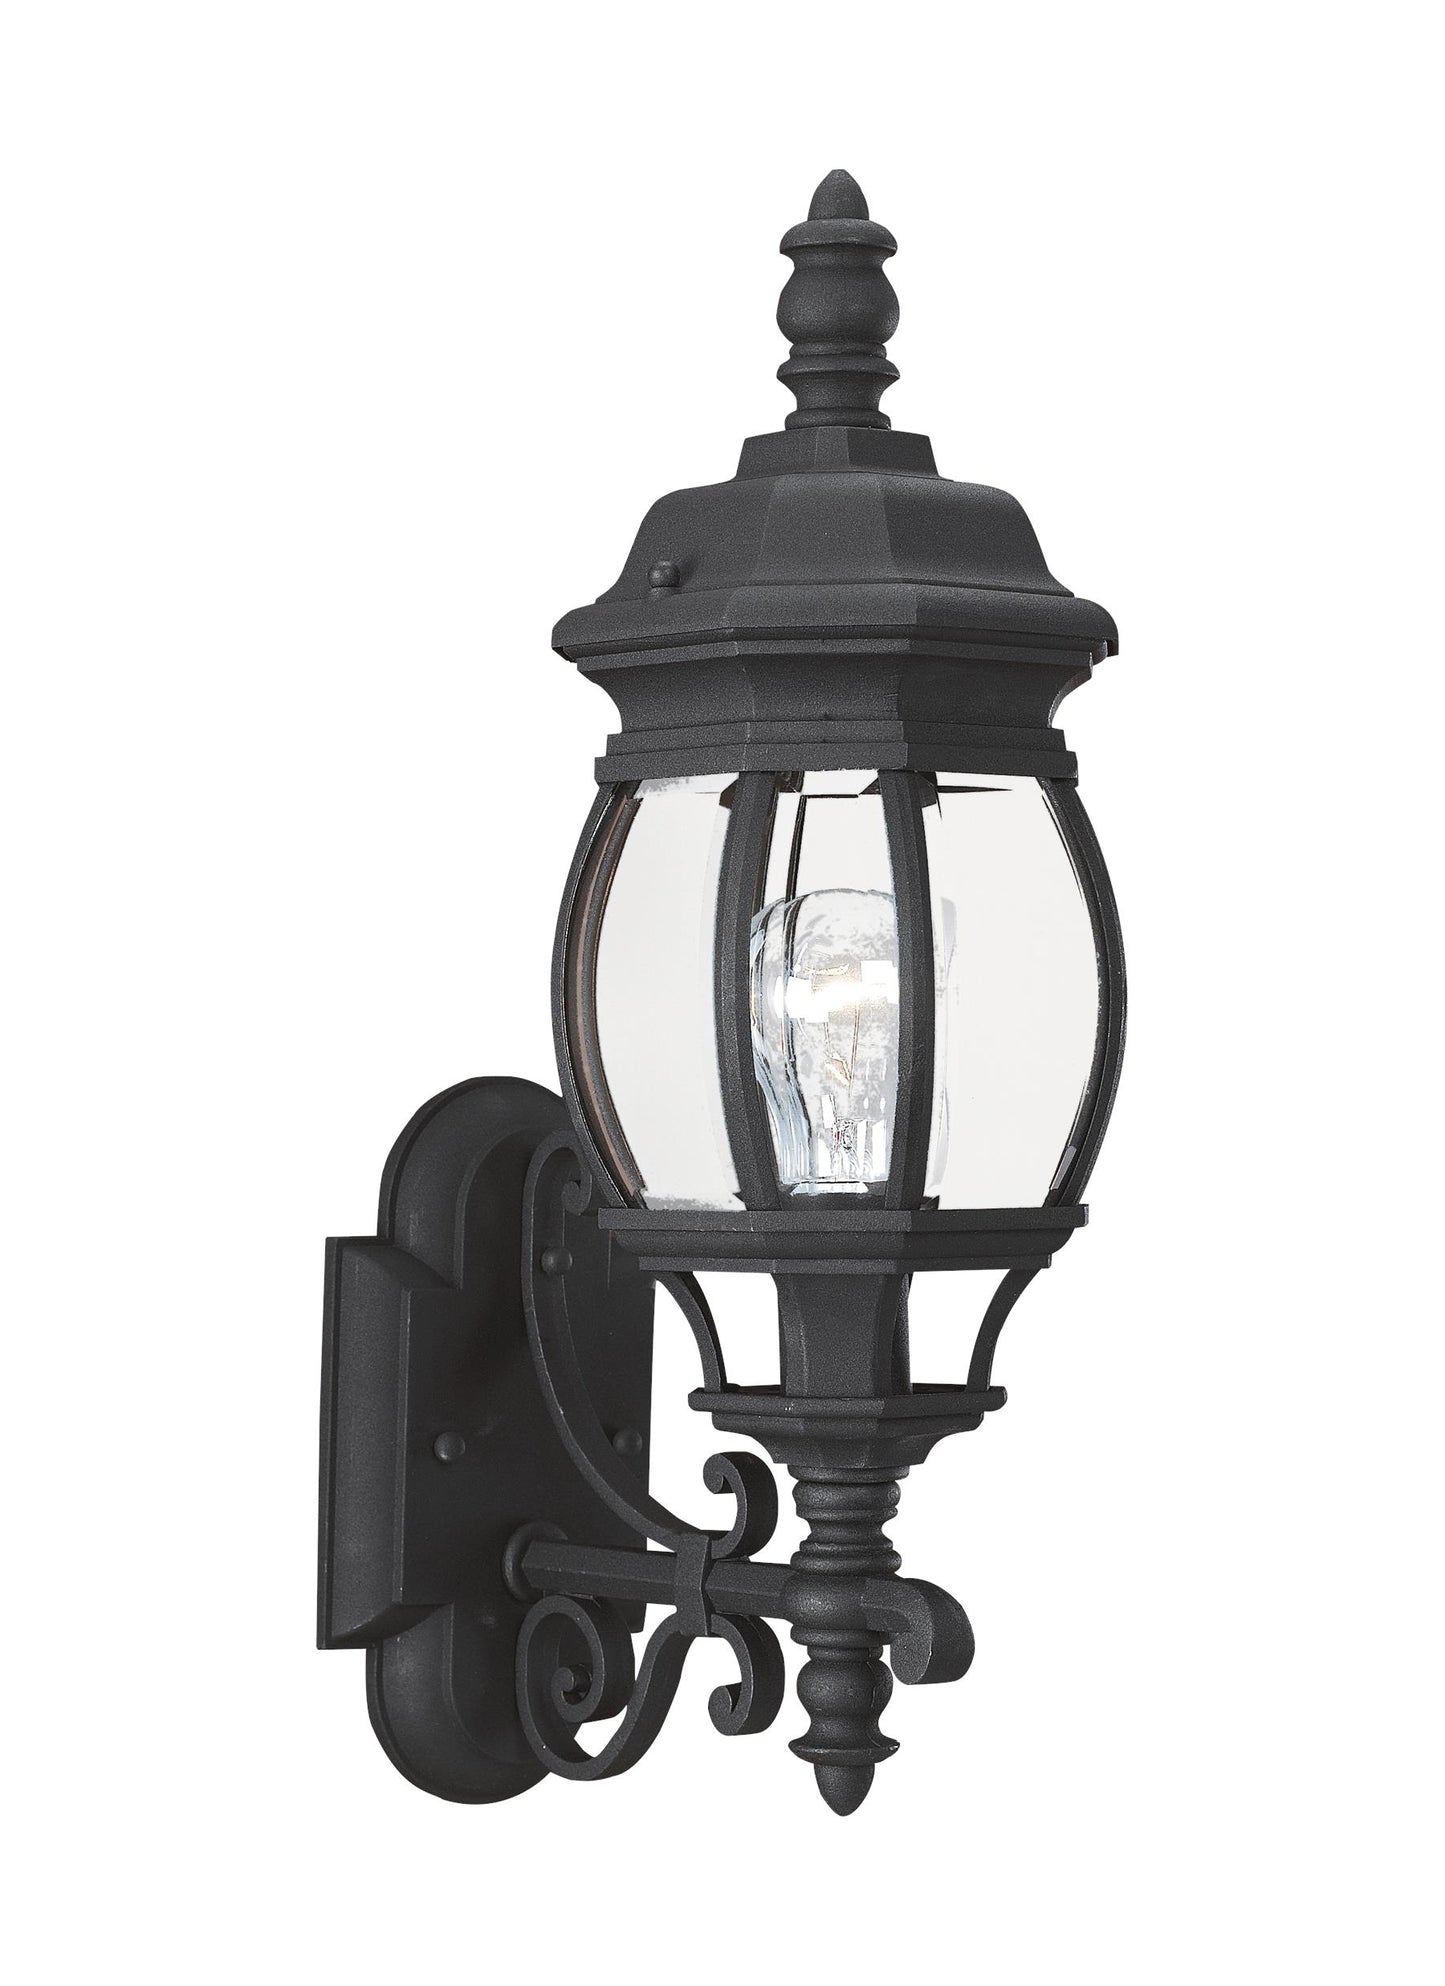 Wynfield traditional 1-light outdoor exterior wall lantern sconce uplight in black finish with clear beveled glass panels